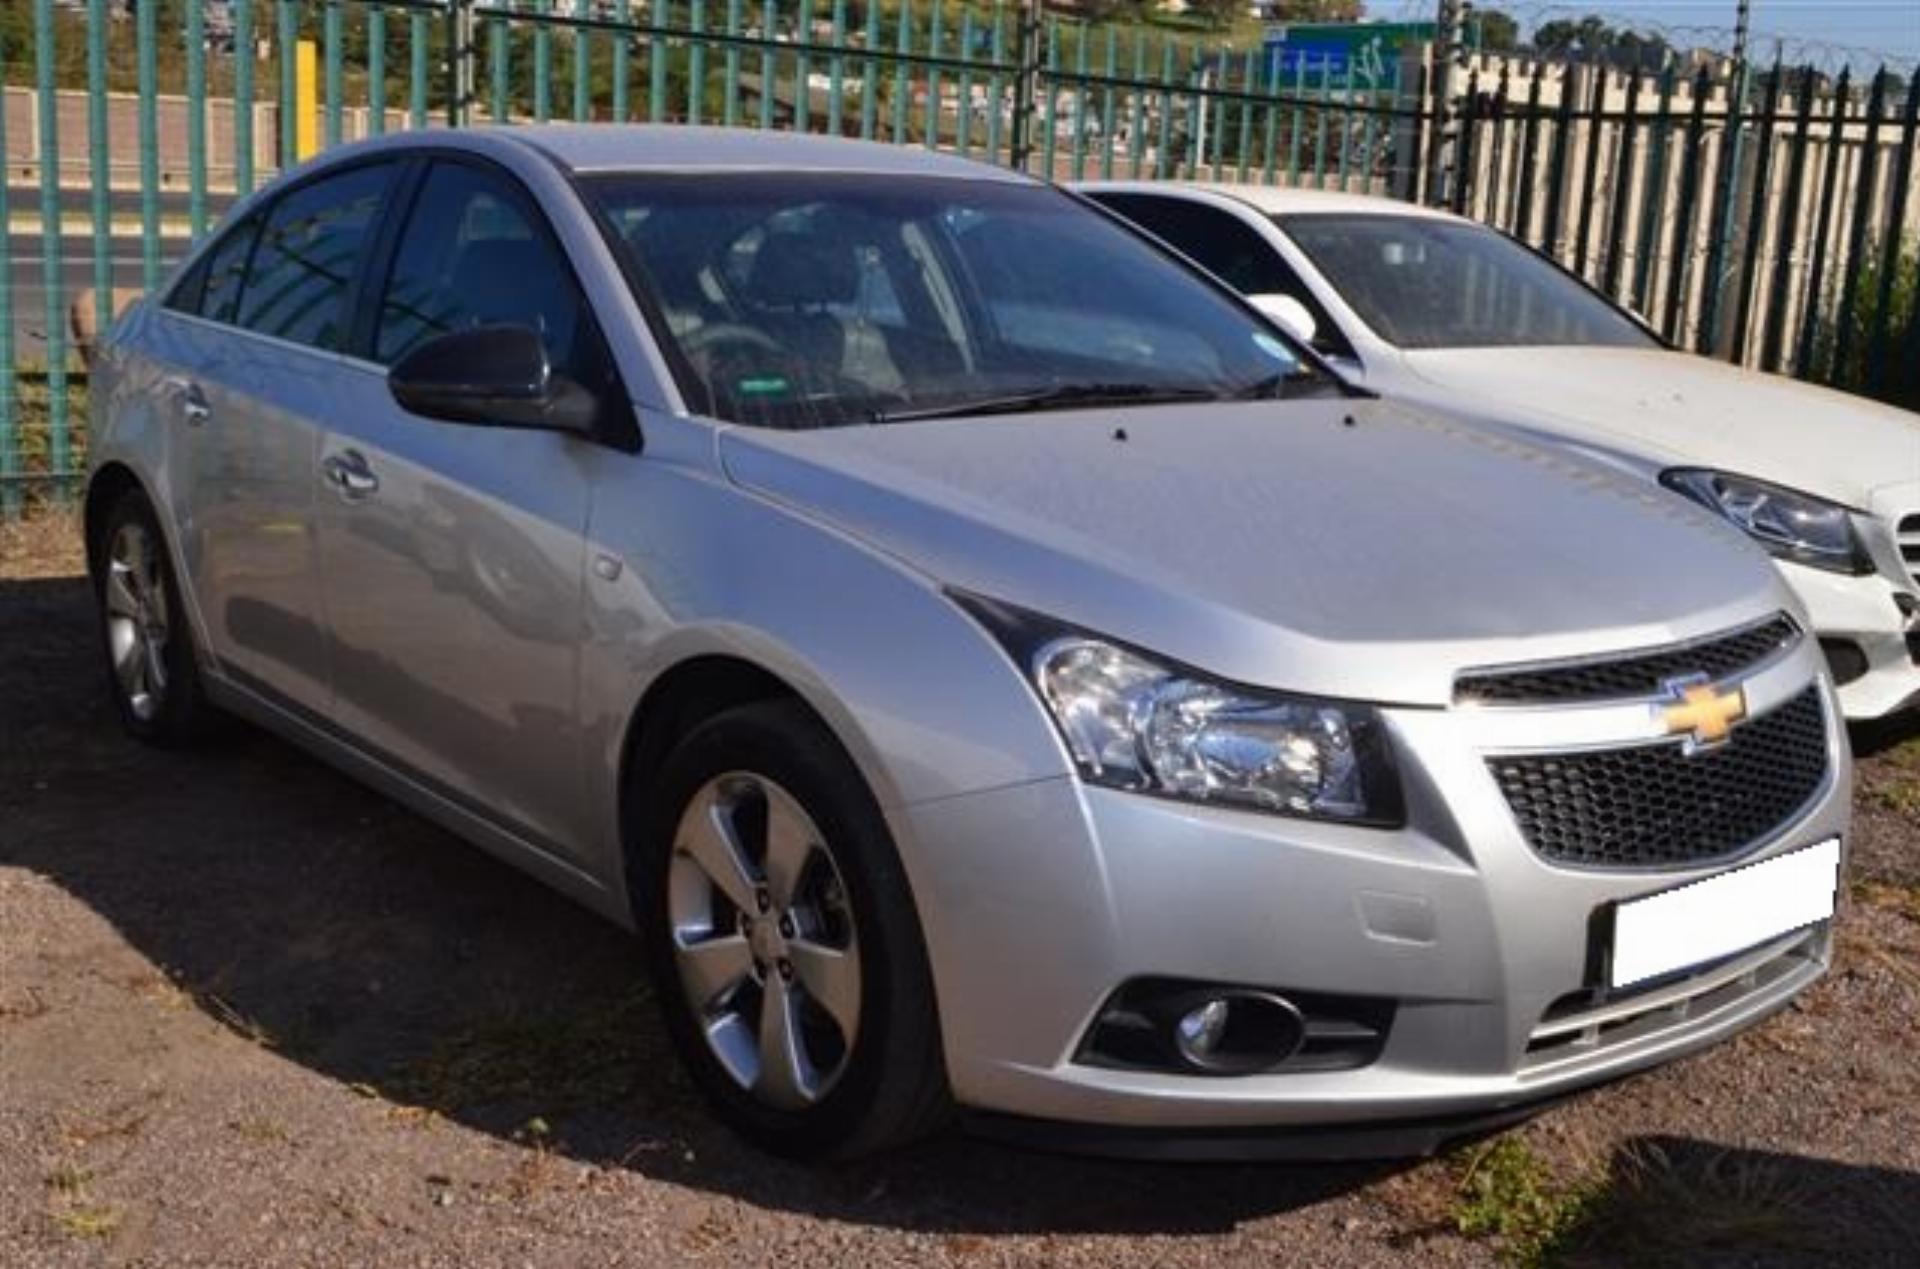 Repossessed Chevrolet Cruze 1.8 LT A/T 2012 on auction